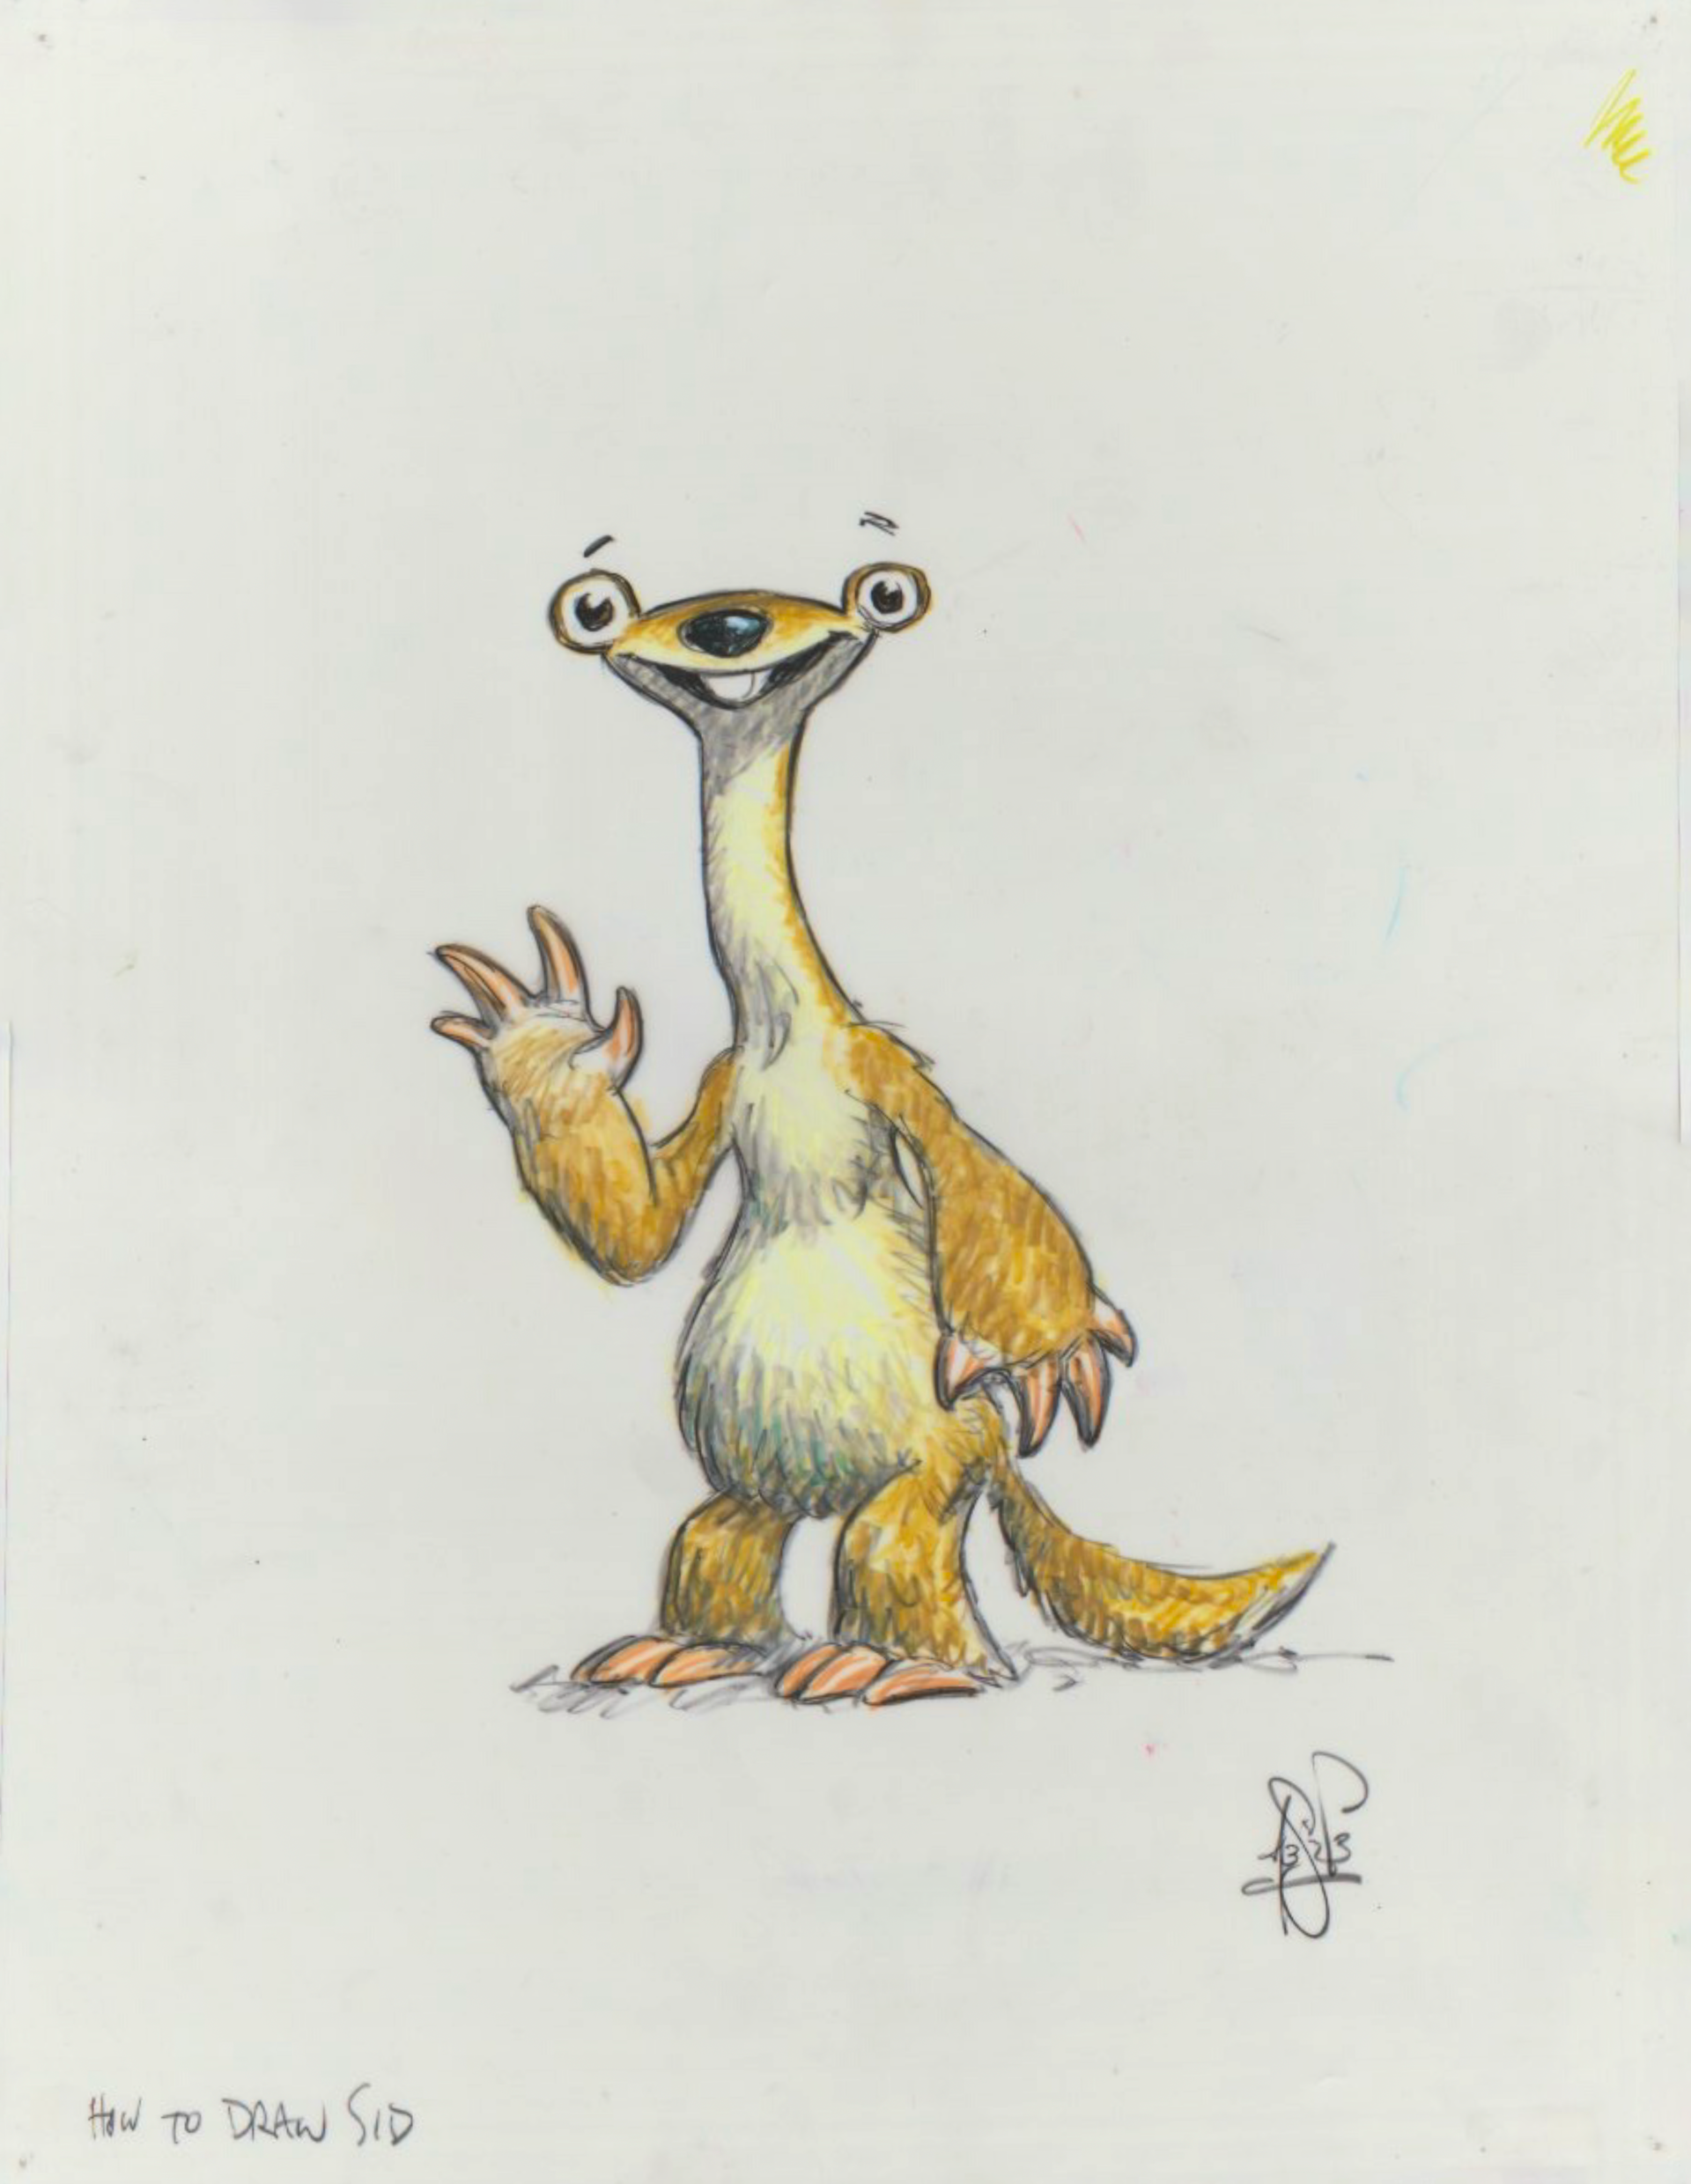 Ice Age “How to draw Sid” by Peter de Sève